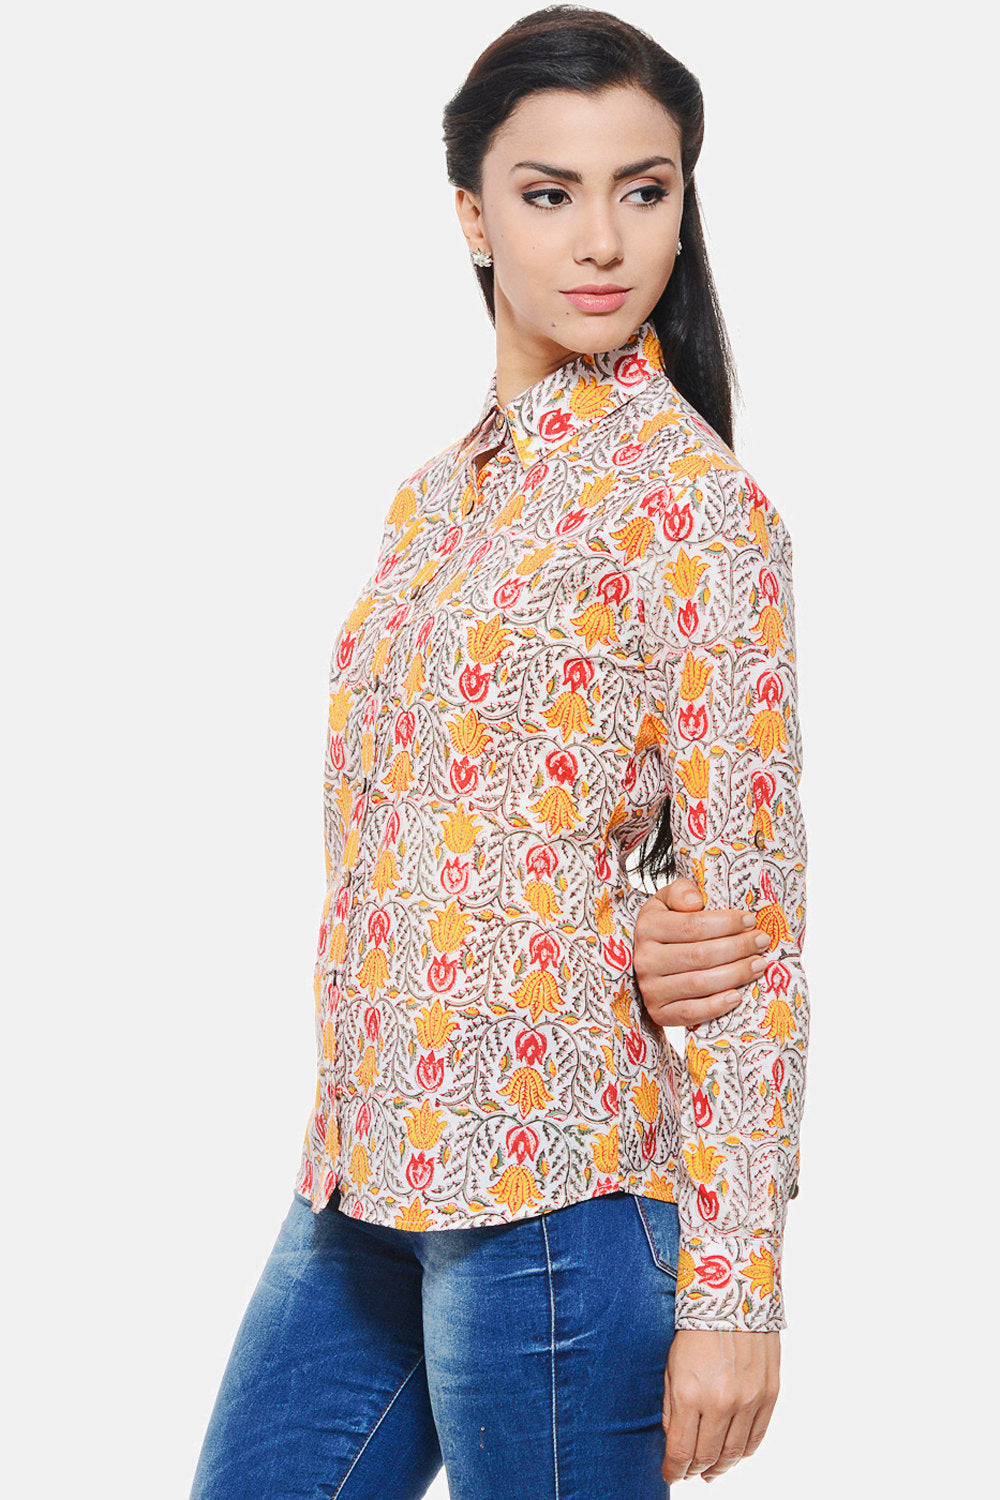 Hand block printed Shirt with yellow and red floral design